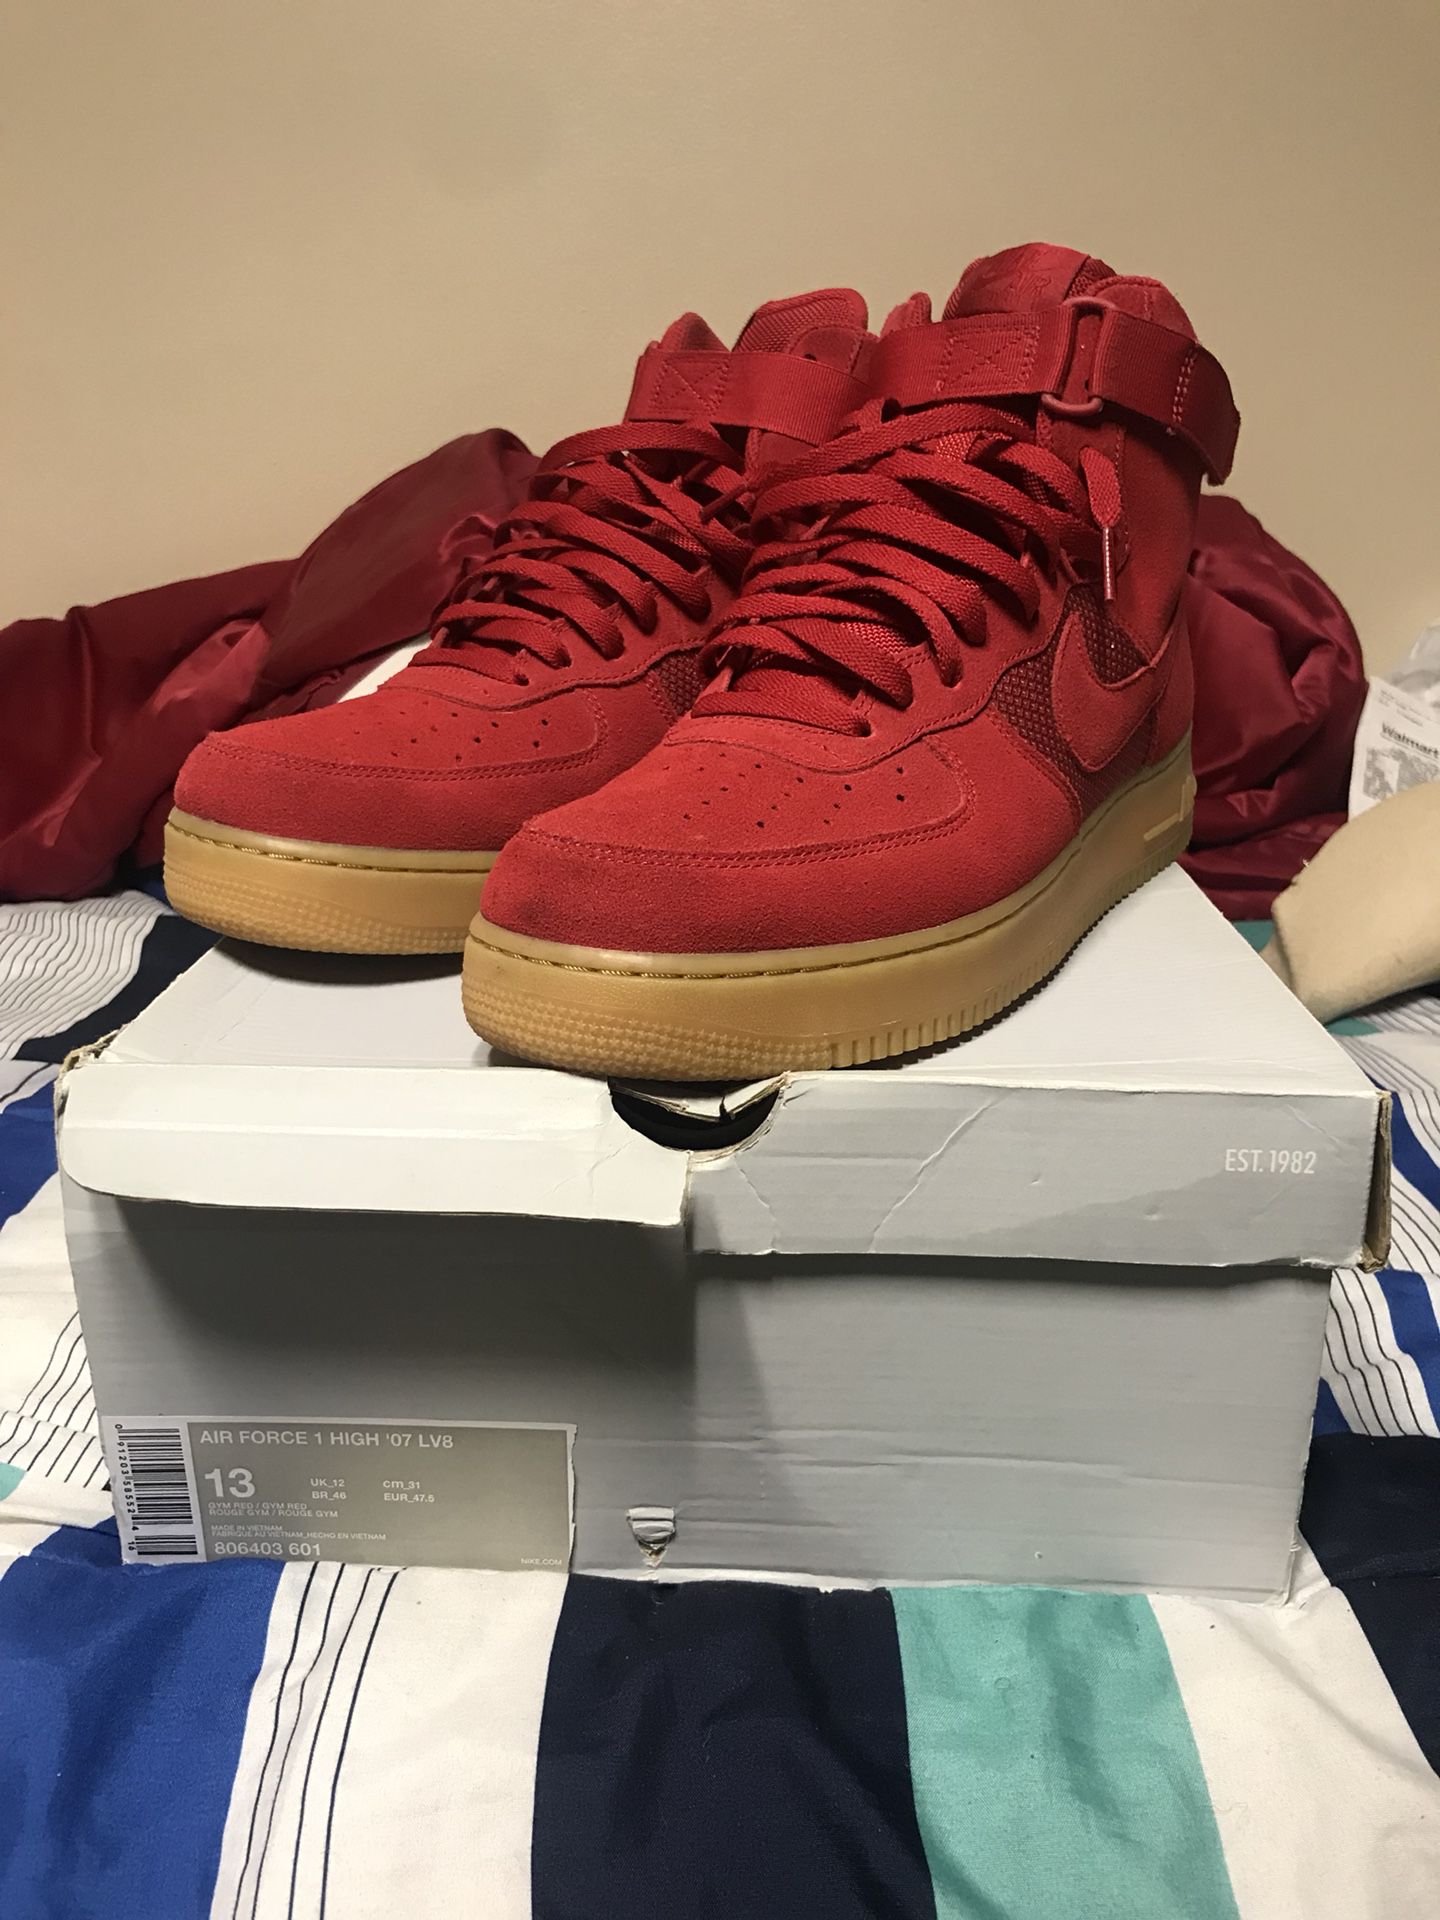 Nike Air Force 1 (AF1) Red Suede w/ Gum Bottom for Sale in Durham, NC -  OfferUp